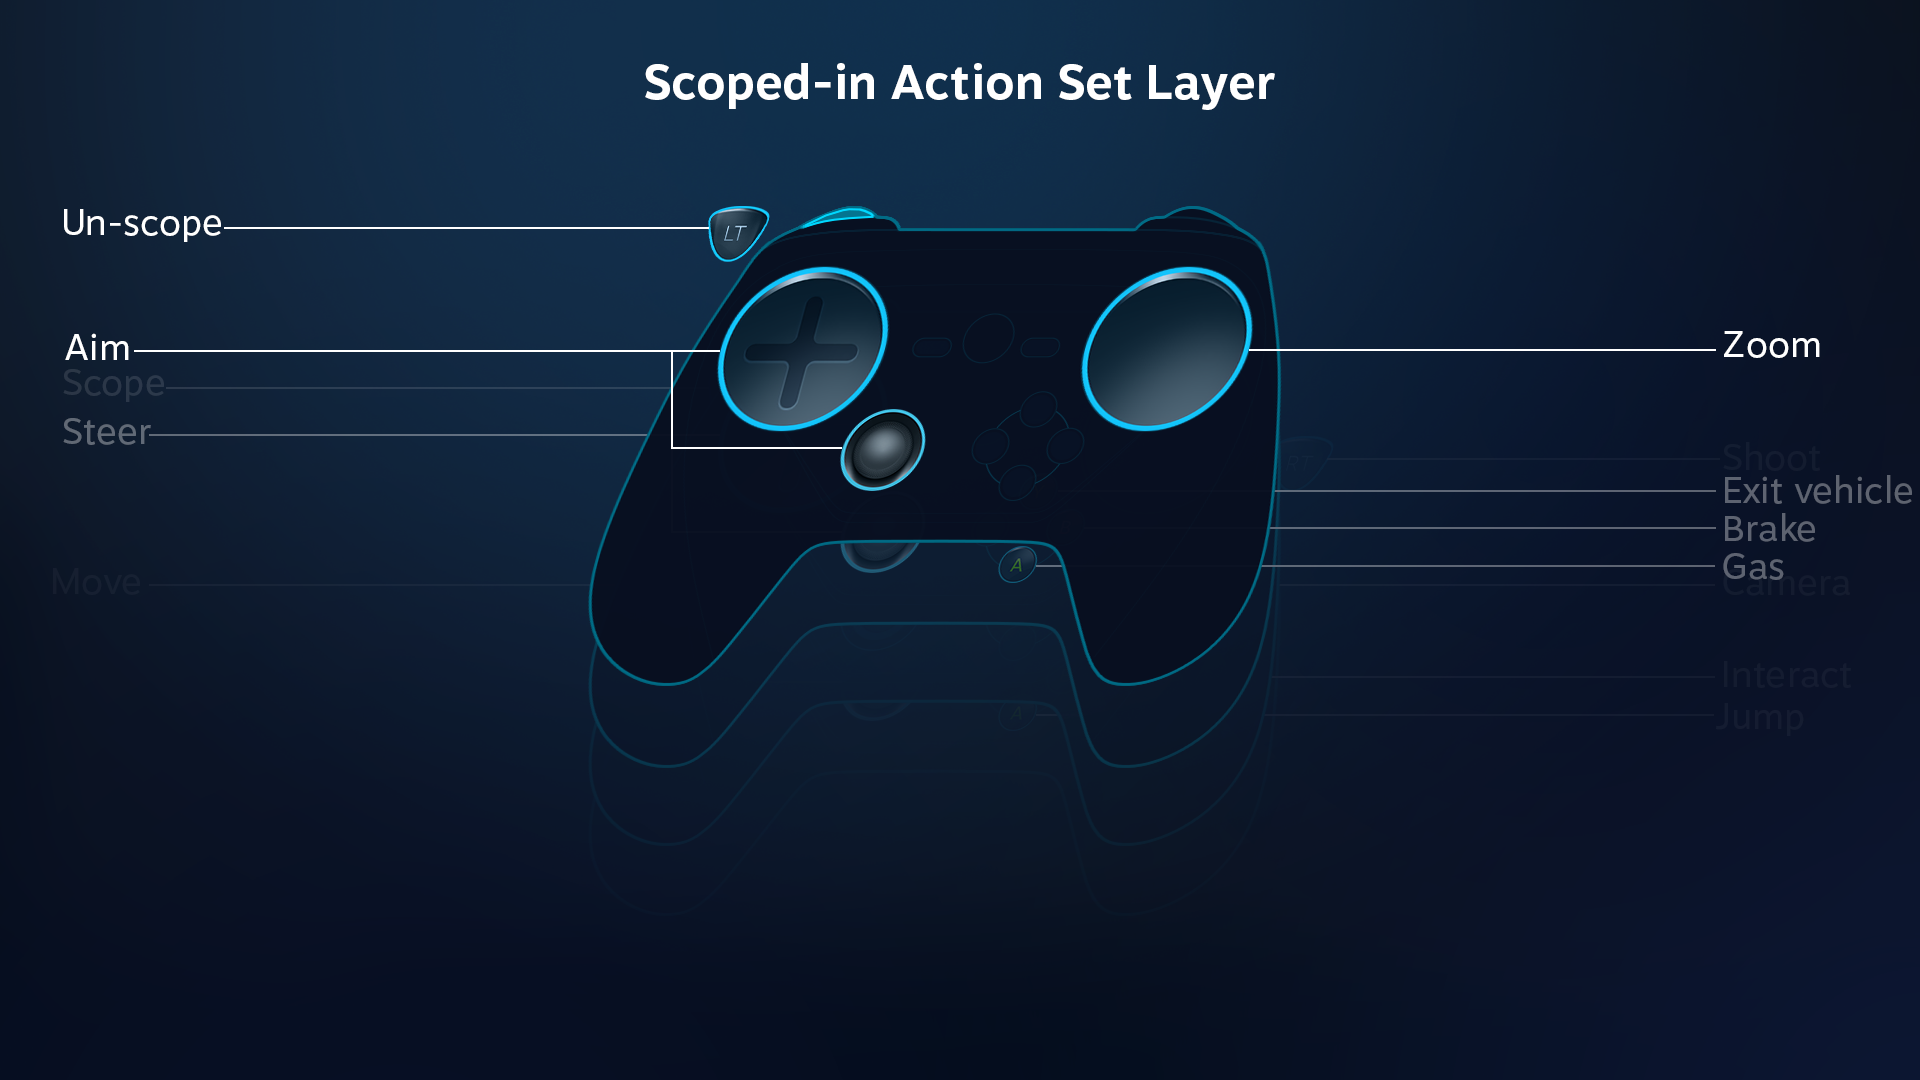 action_set_layers_scope.png